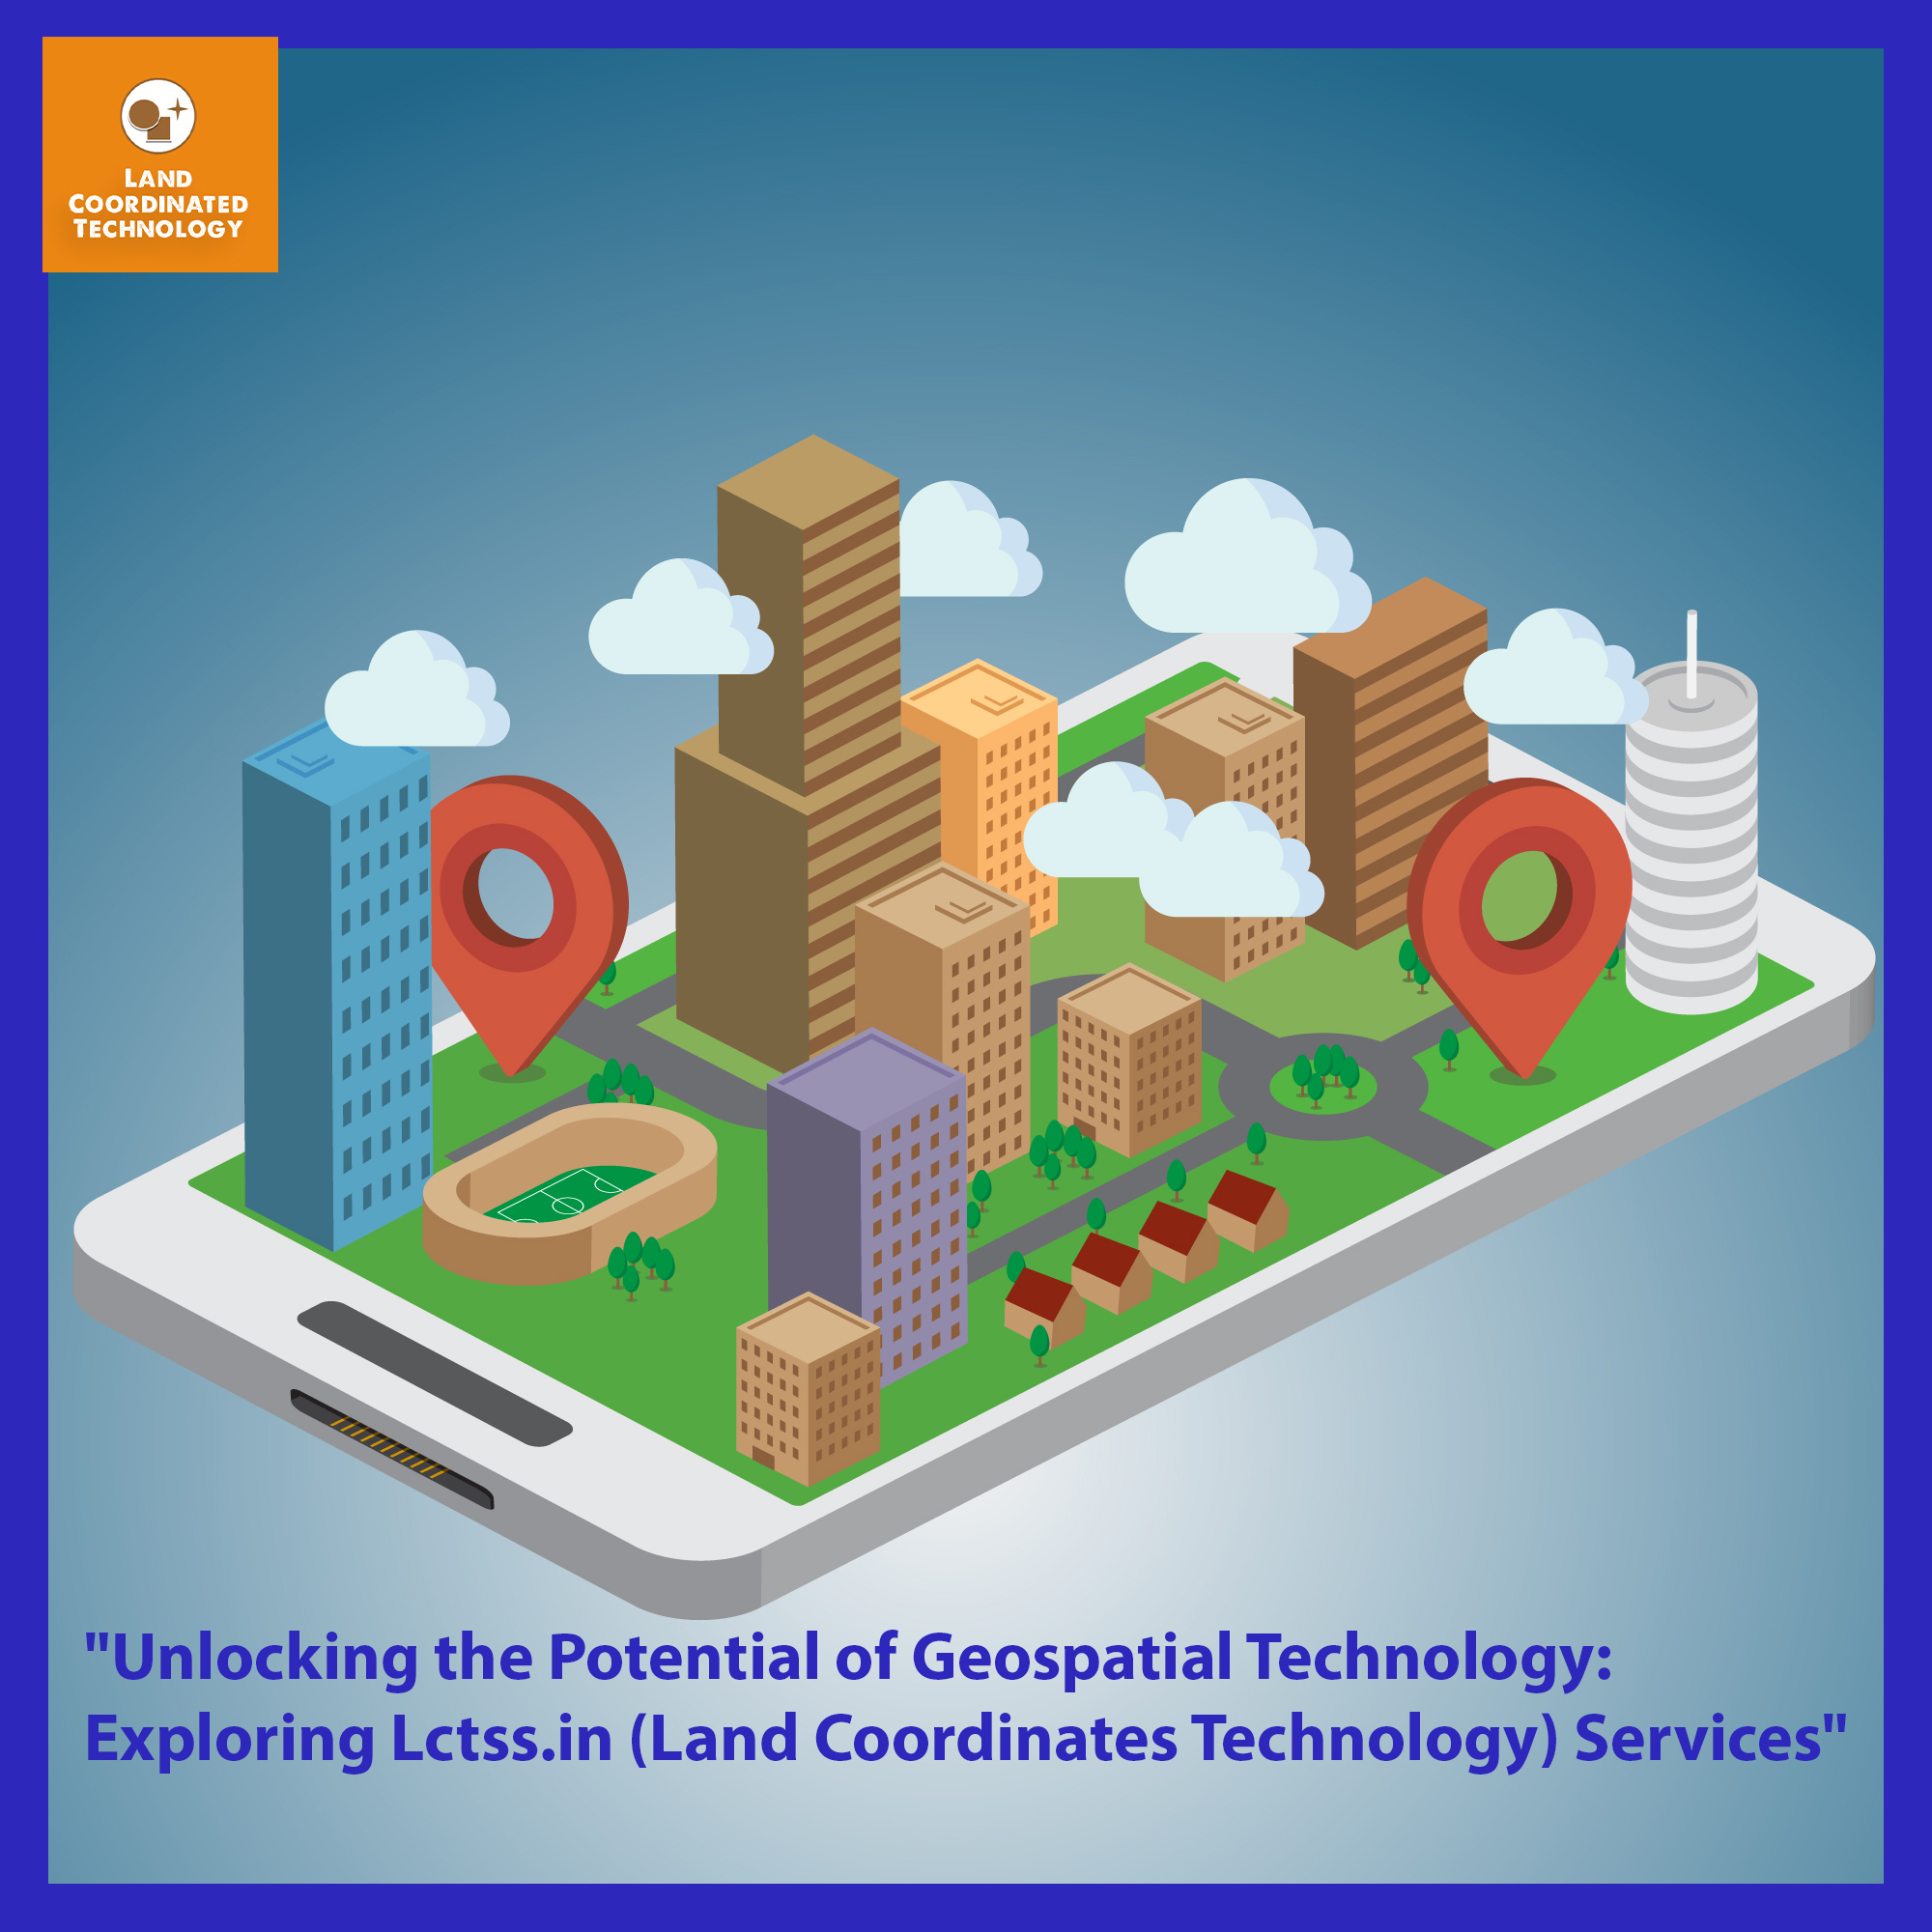 Unlocking the Potential of Geospatial Technology: Exploring Lctss.in (Land Coordinates Technology) Services.